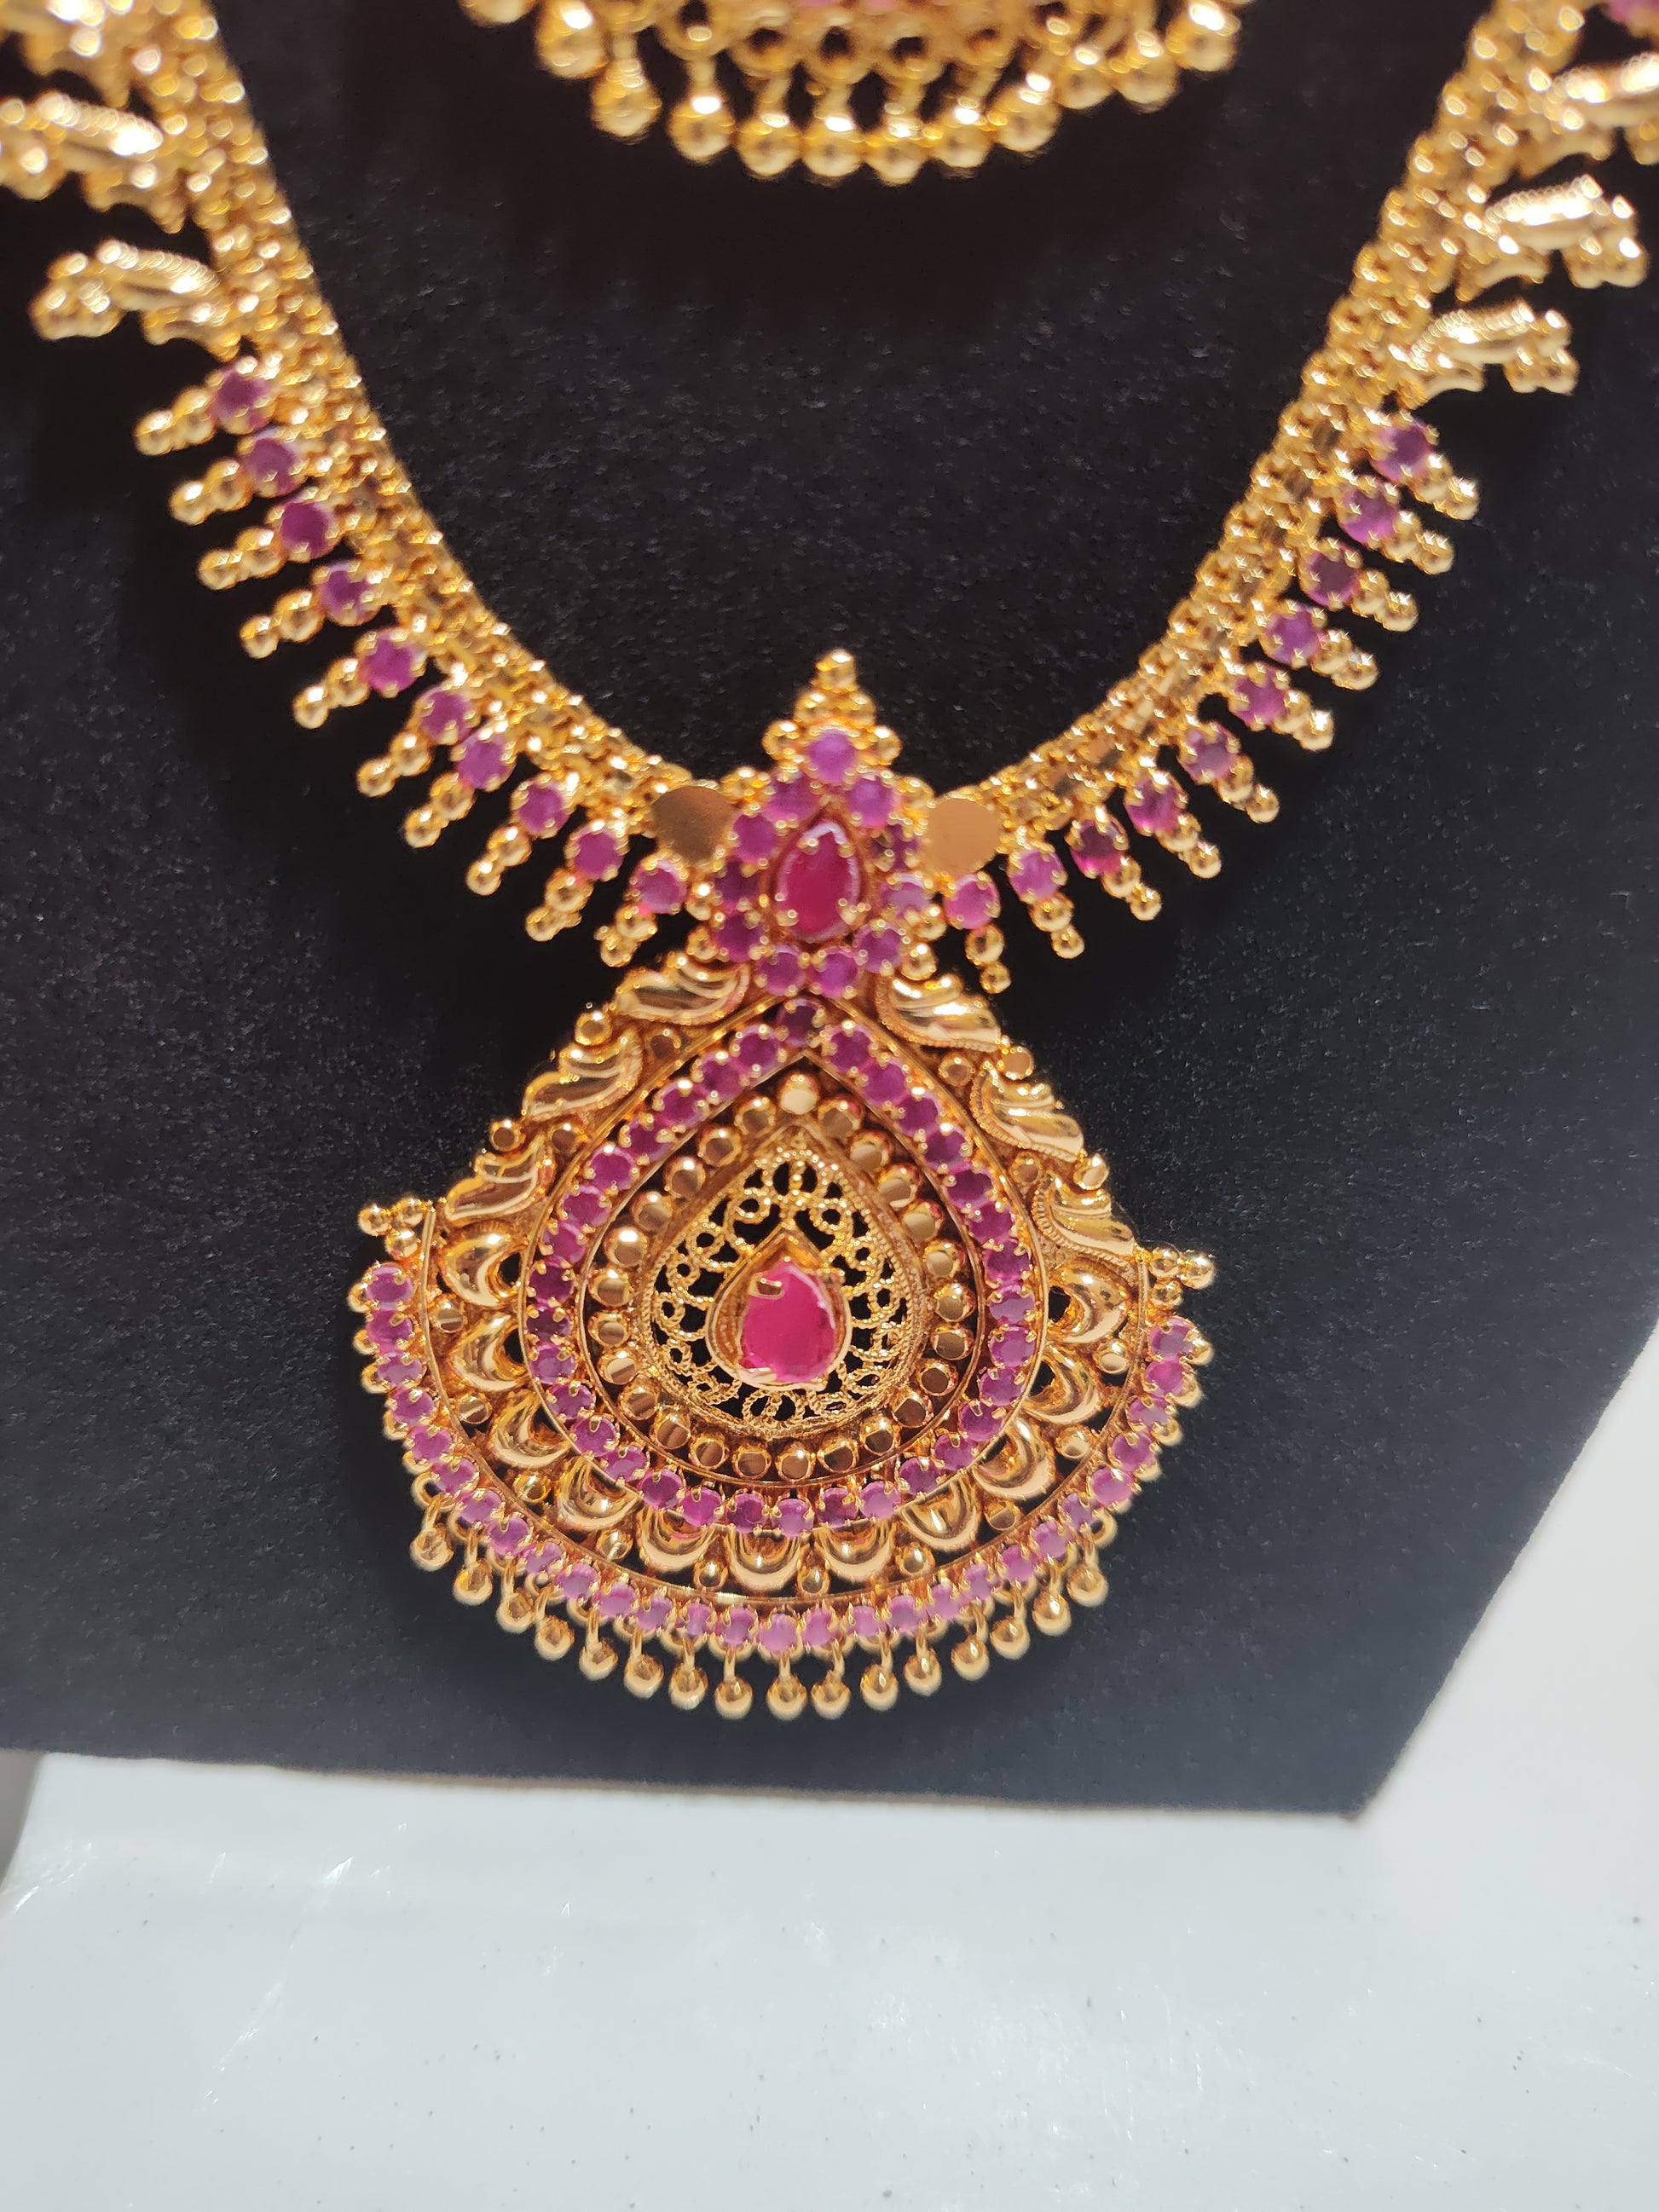 Necklace With Beautiful Design In USA